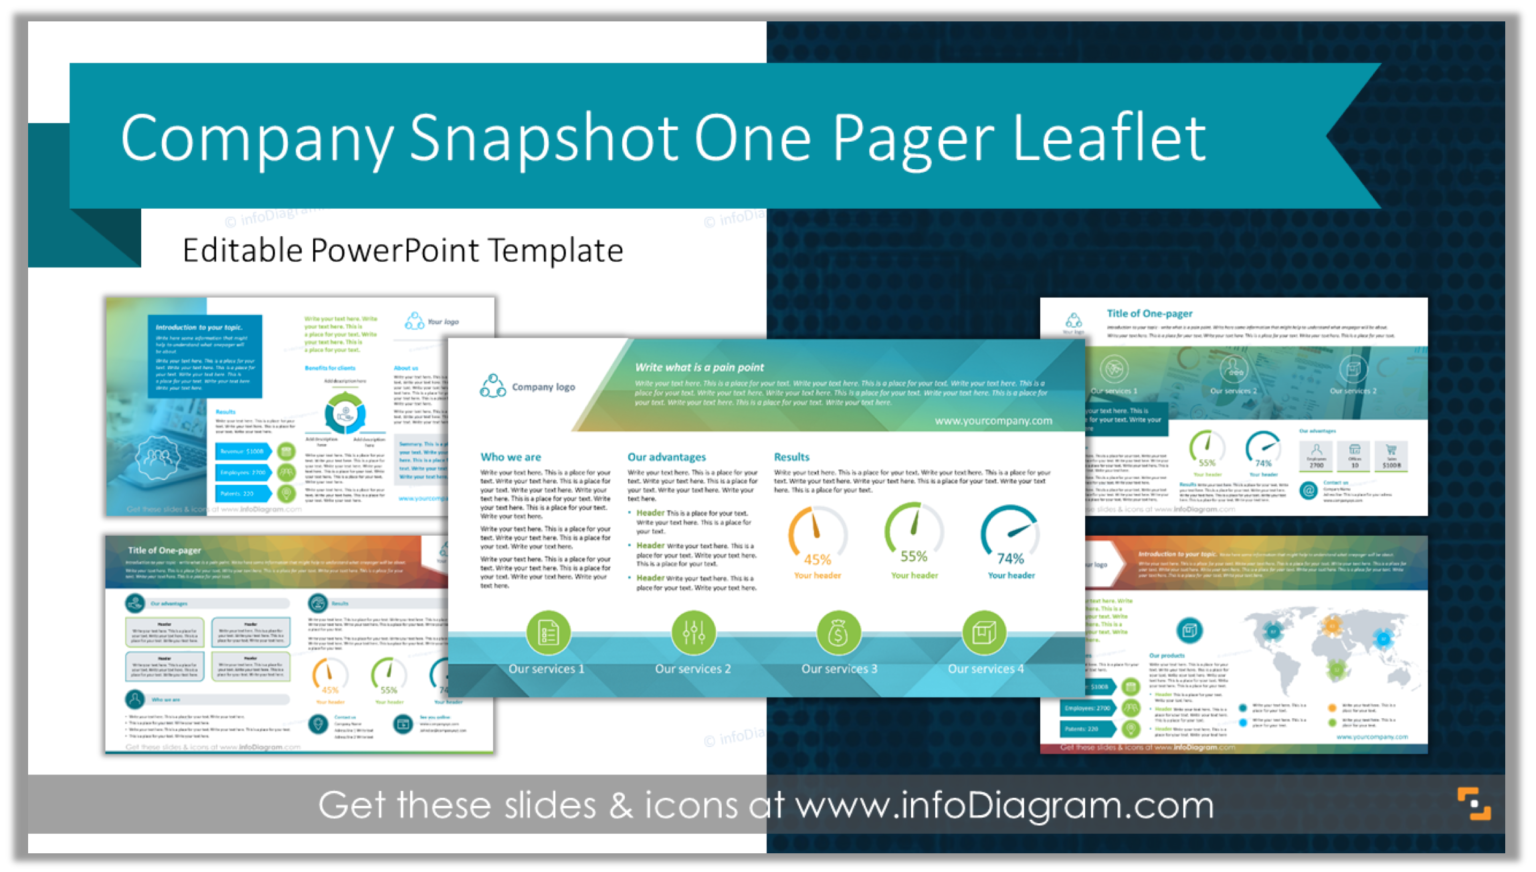 Company Snapshot One Pager Leaflet PowerPoint Template title Blog